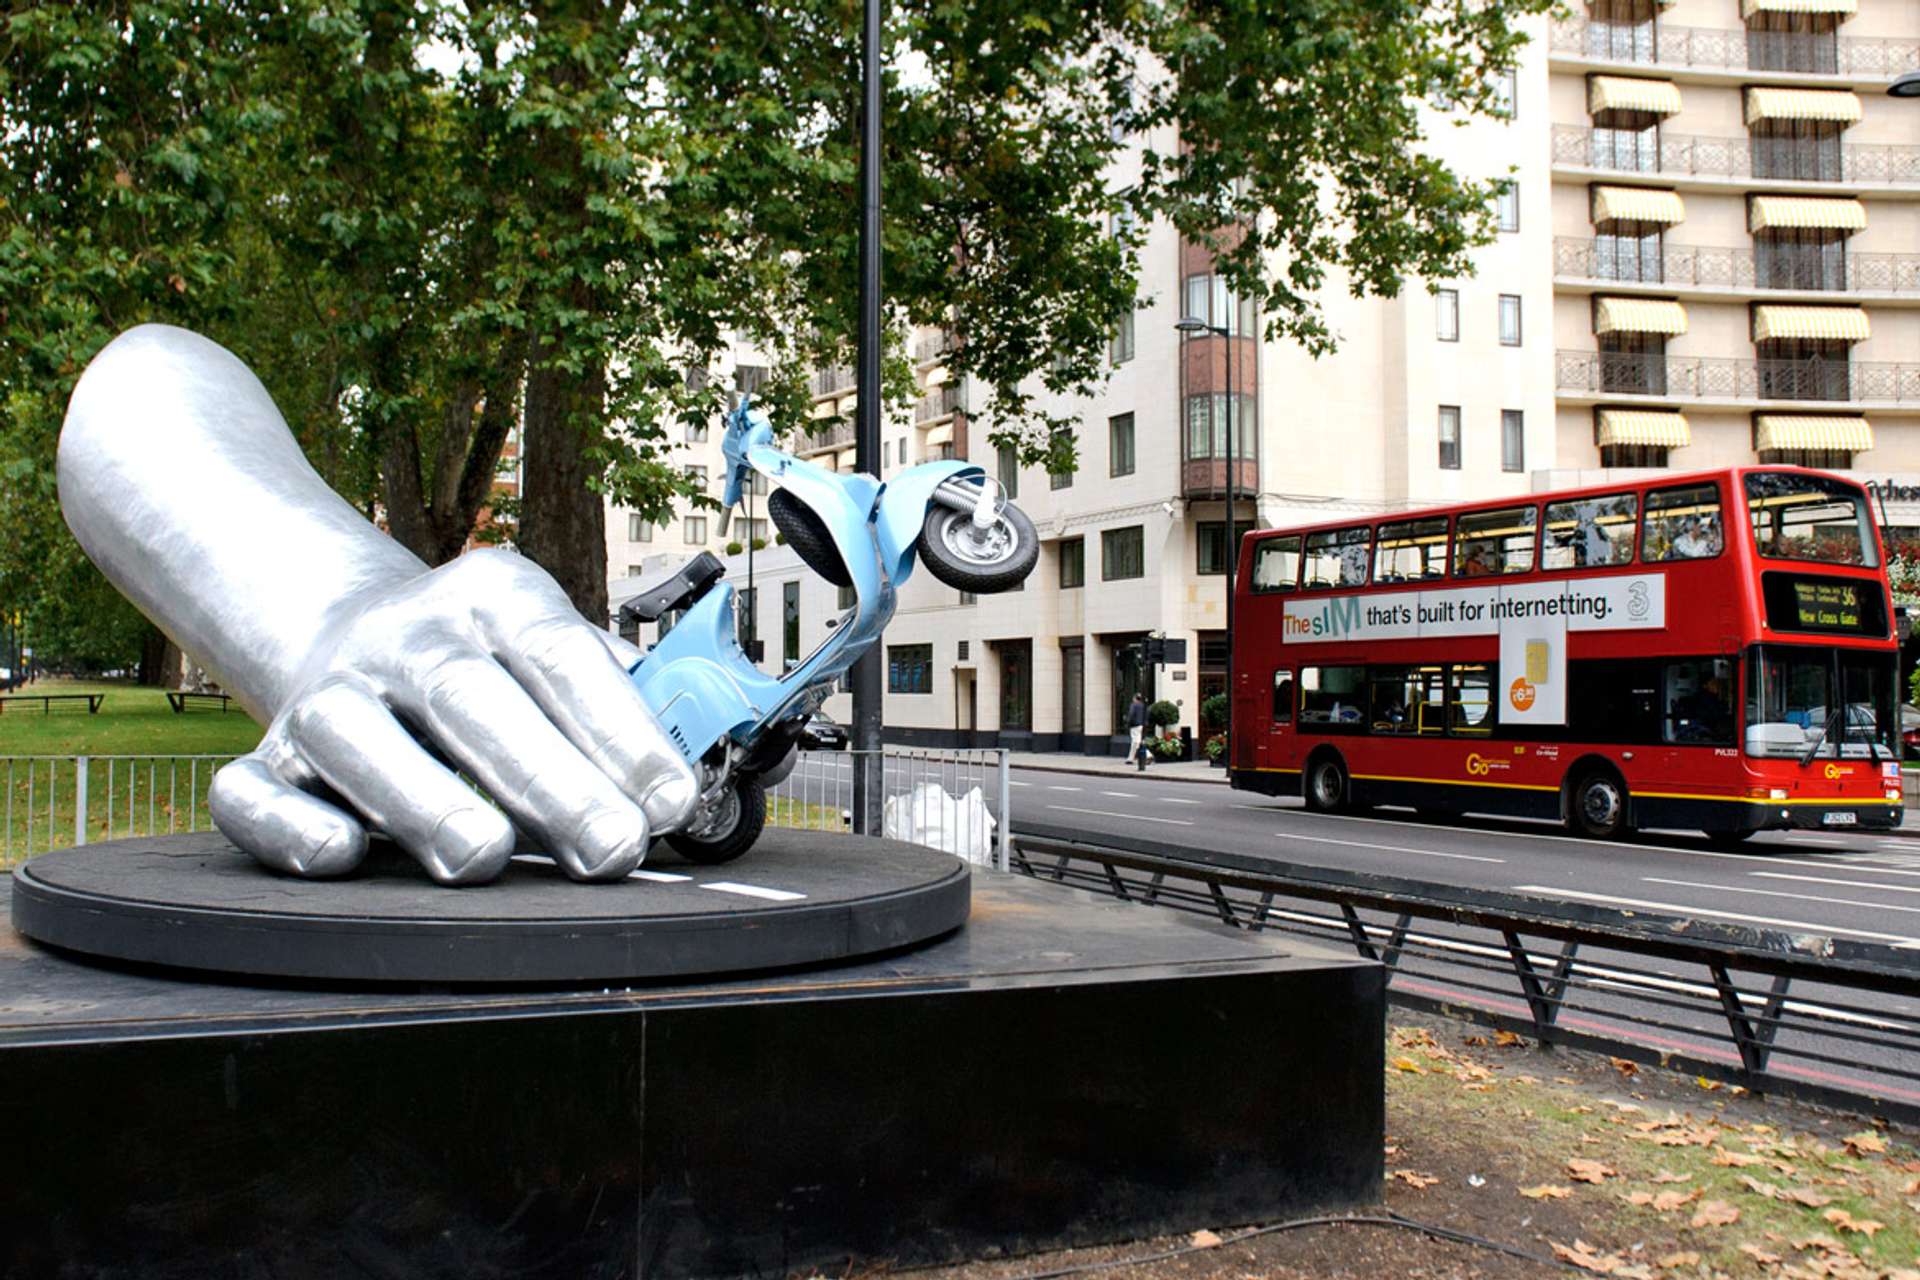 A bronze sculpture titled "Dolce Vita" featuring a large hand emerging from the ground, holding a vintage scooter, created by artist Lorenzo Quinn in 2013.